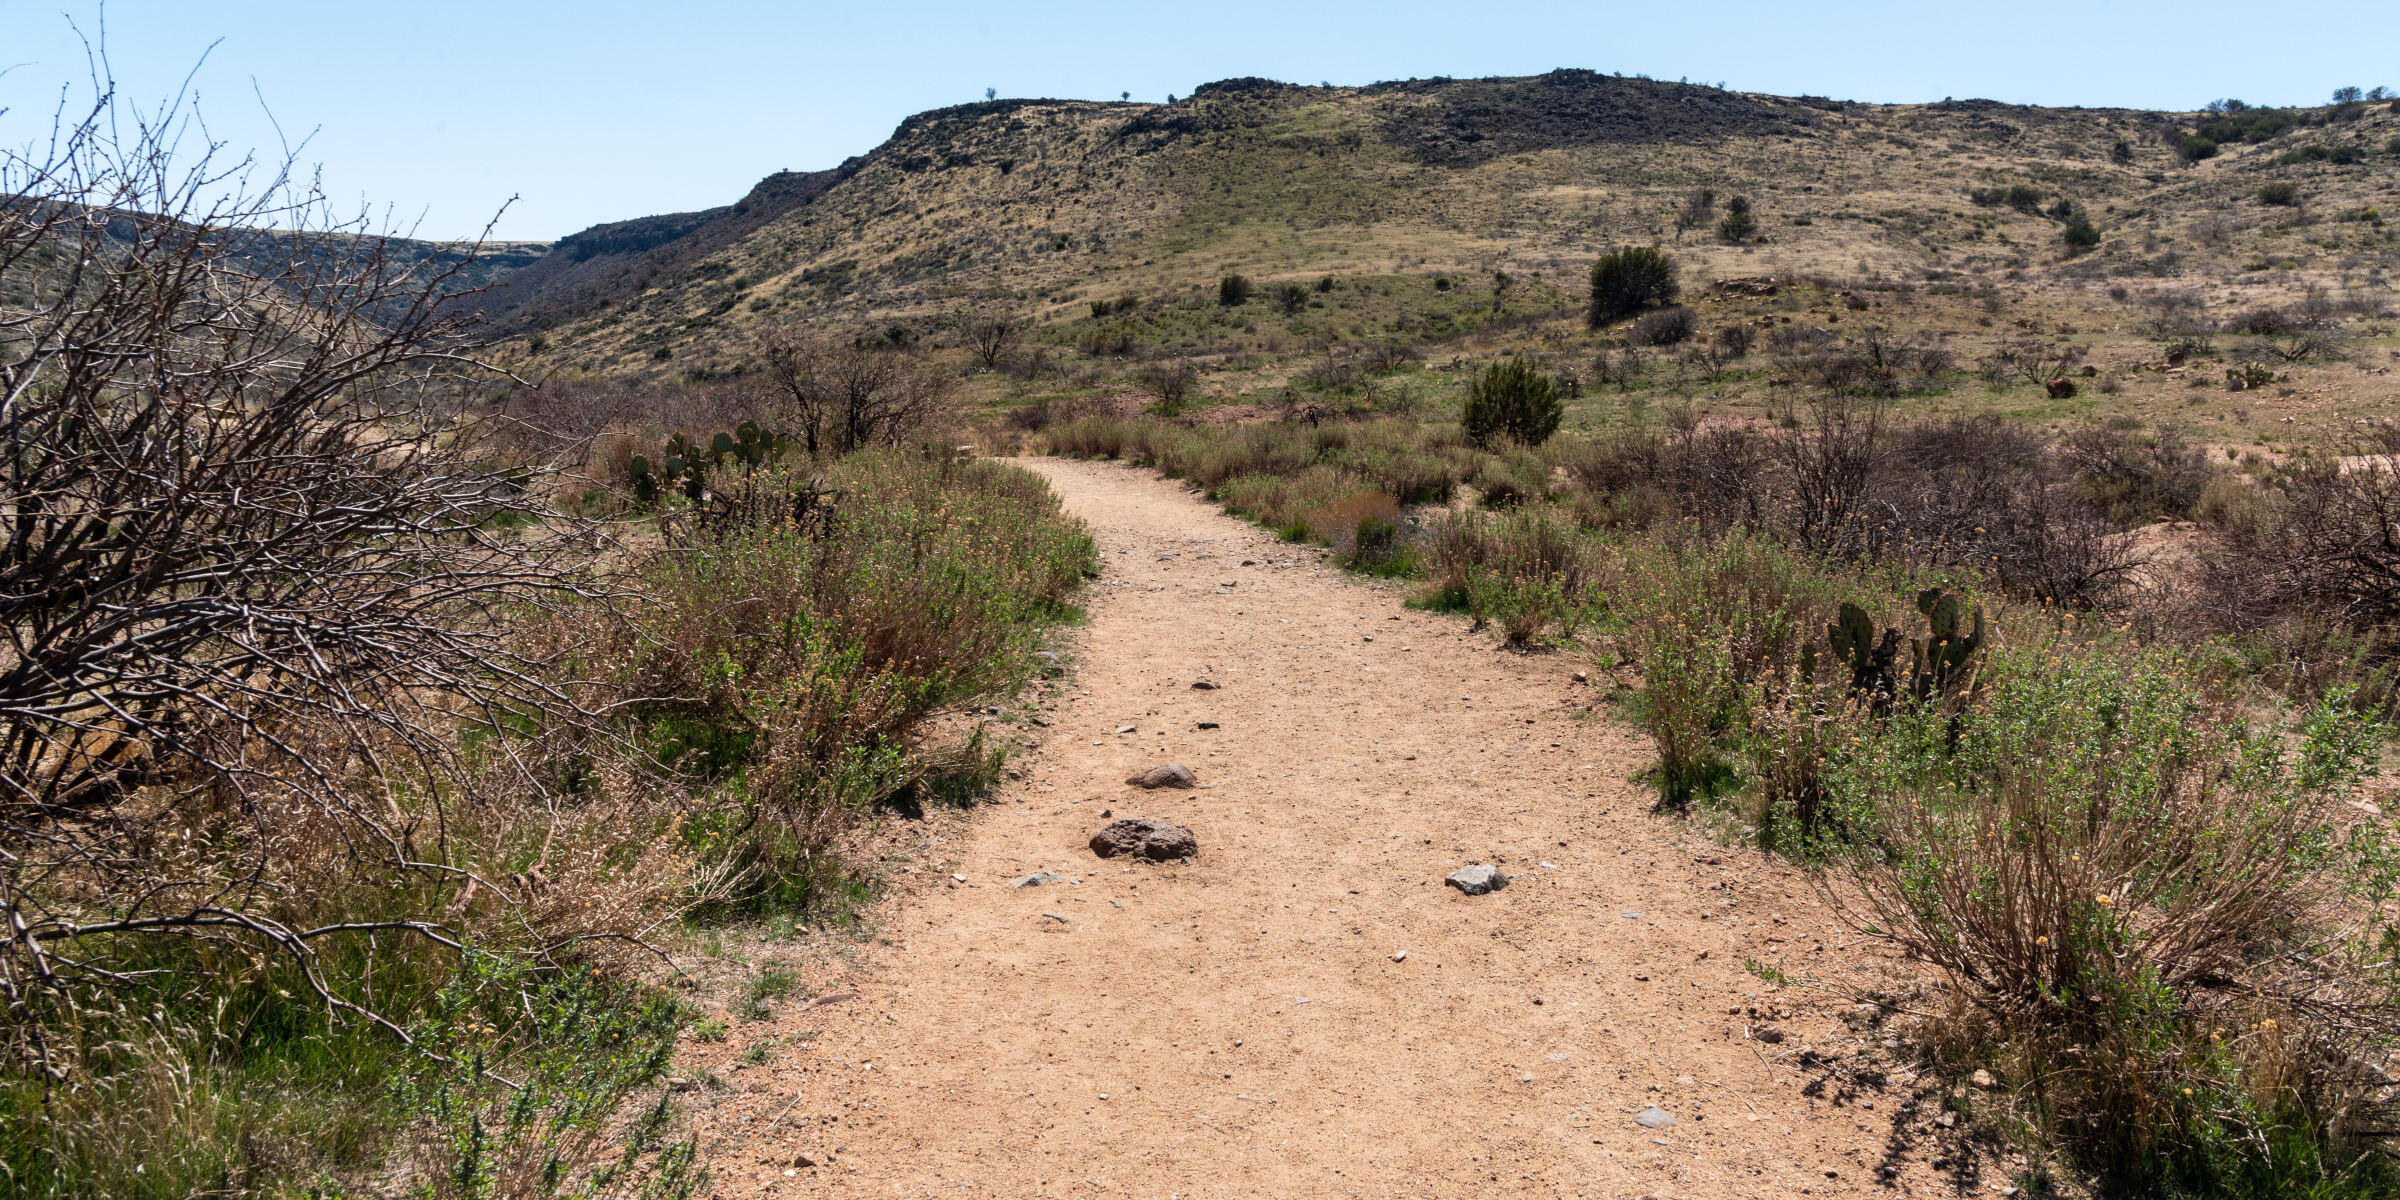 A packed dirt trail stretches evenly through a lush desert landscape on a clear, sunny day.